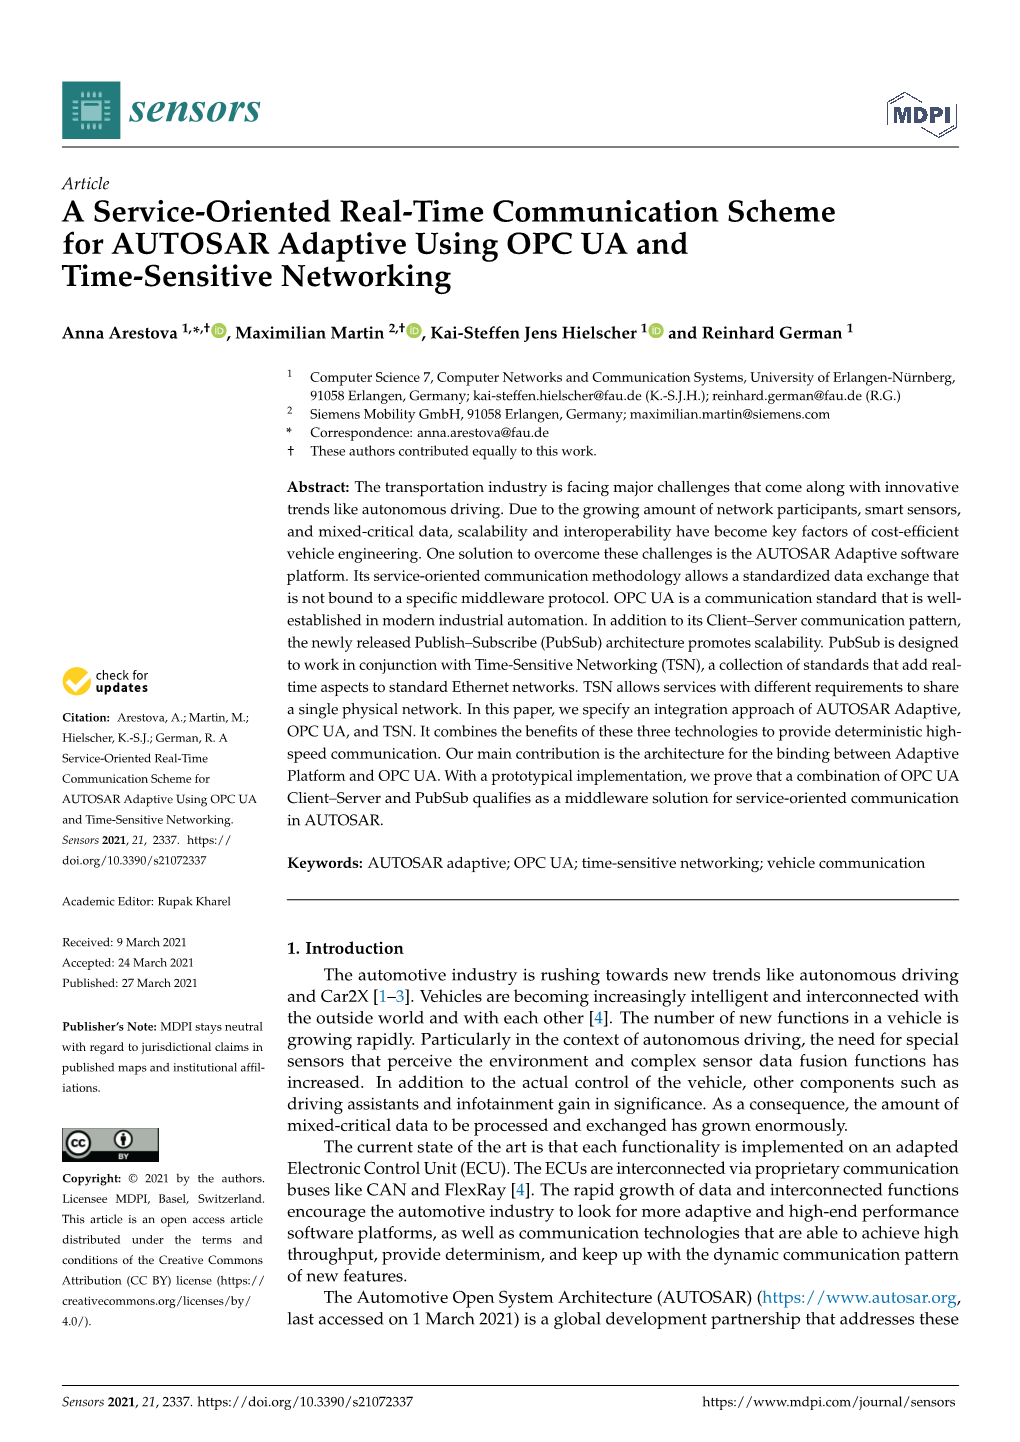 A Service-Oriented Real-Time Communication Scheme for AUTOSAR Adaptive Using OPC UA and Time-Sensitive Networking